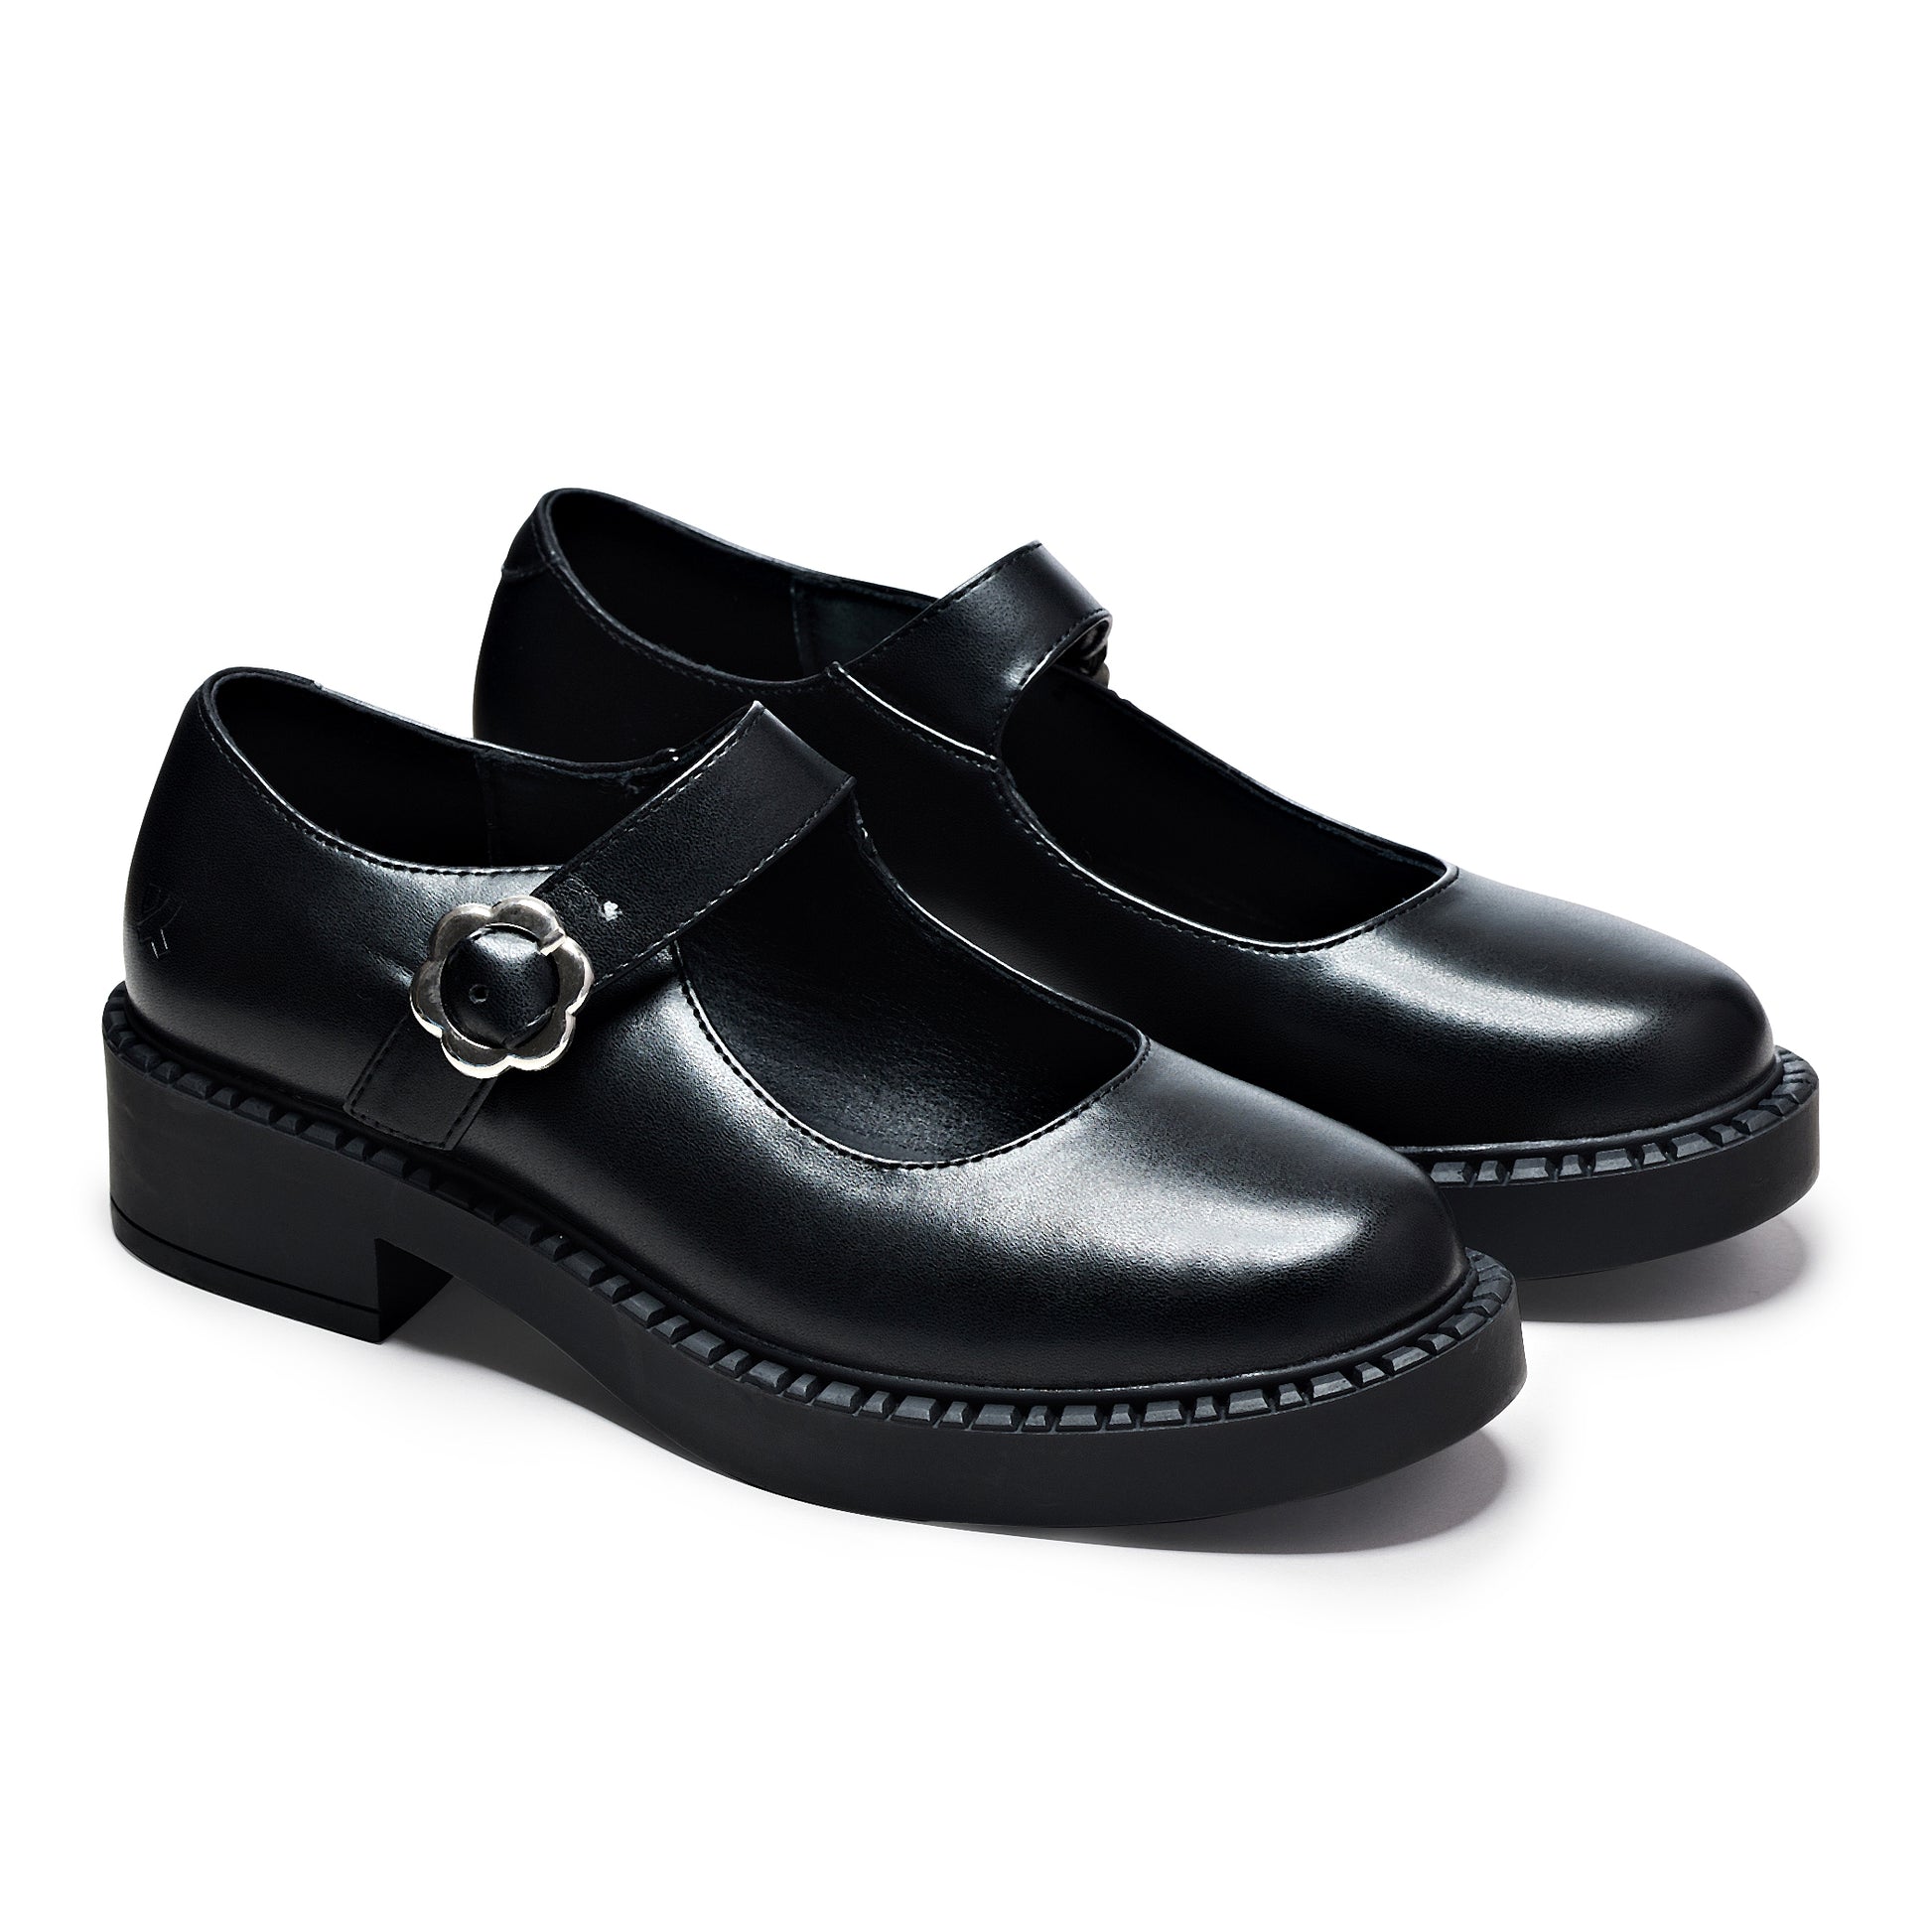 Nectar Prime Tale Mary Jane Shoes - Mary Janes - KOI Footwear - Black - Three-Quarter View